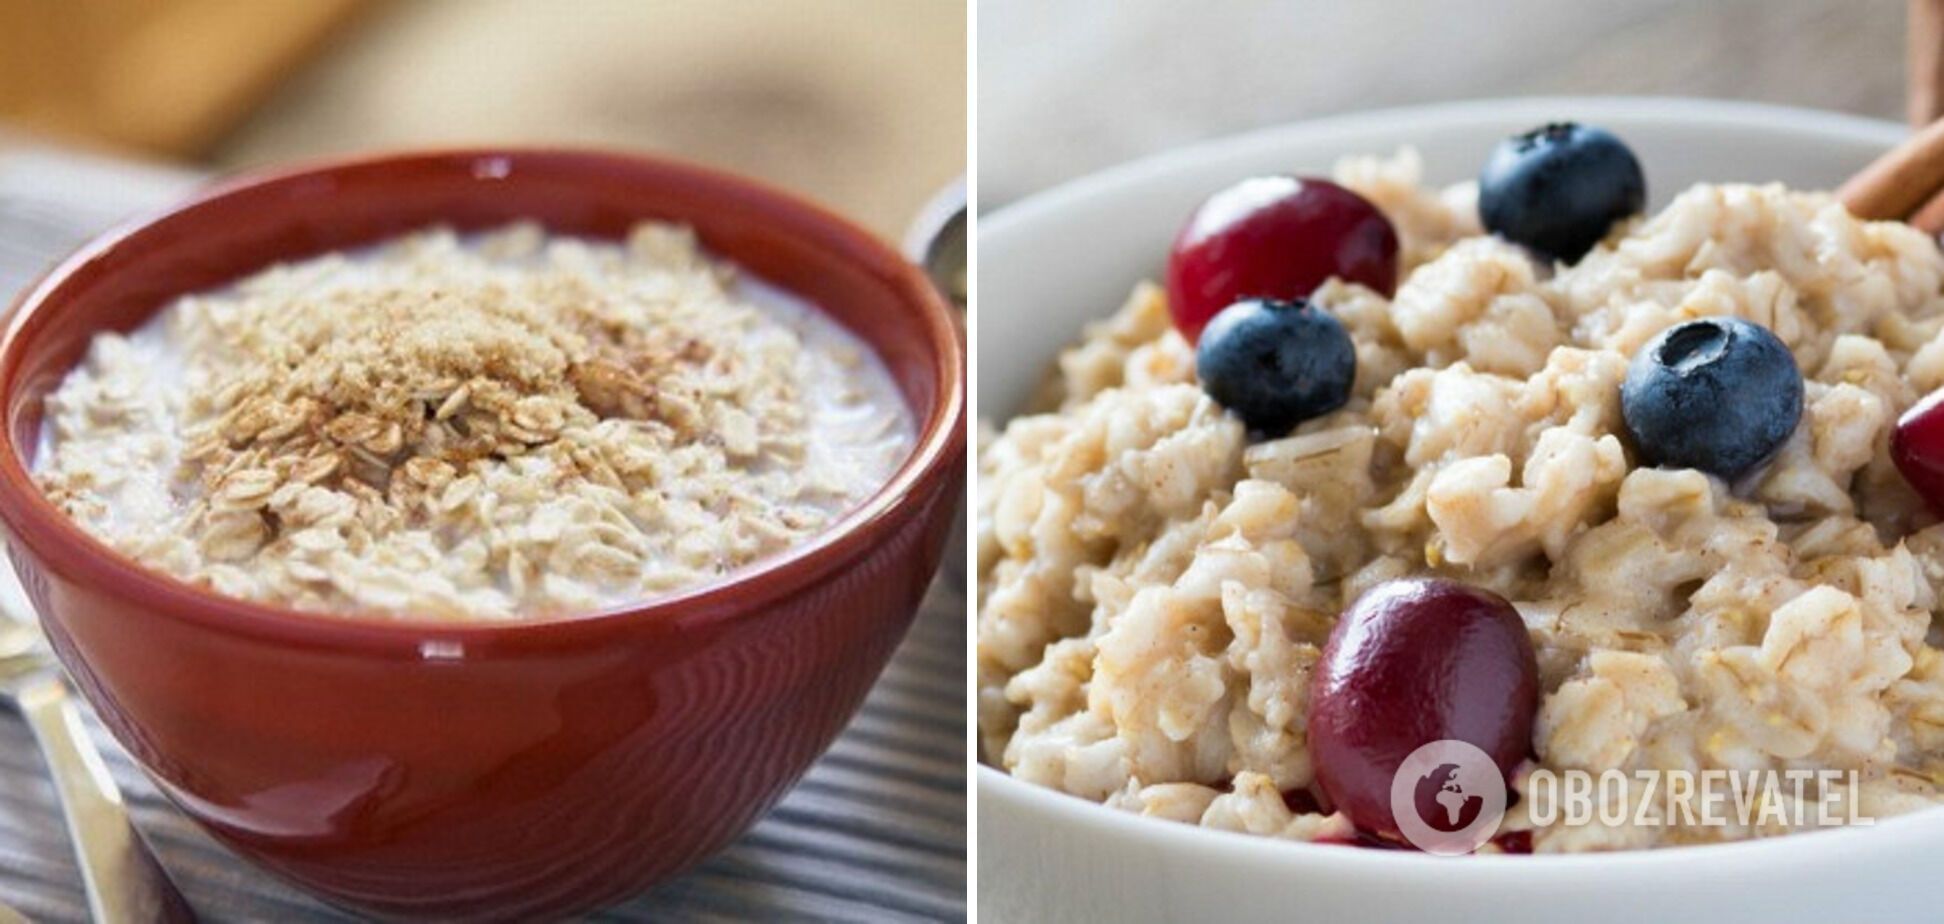 Oatmeal with cinnamon and berries